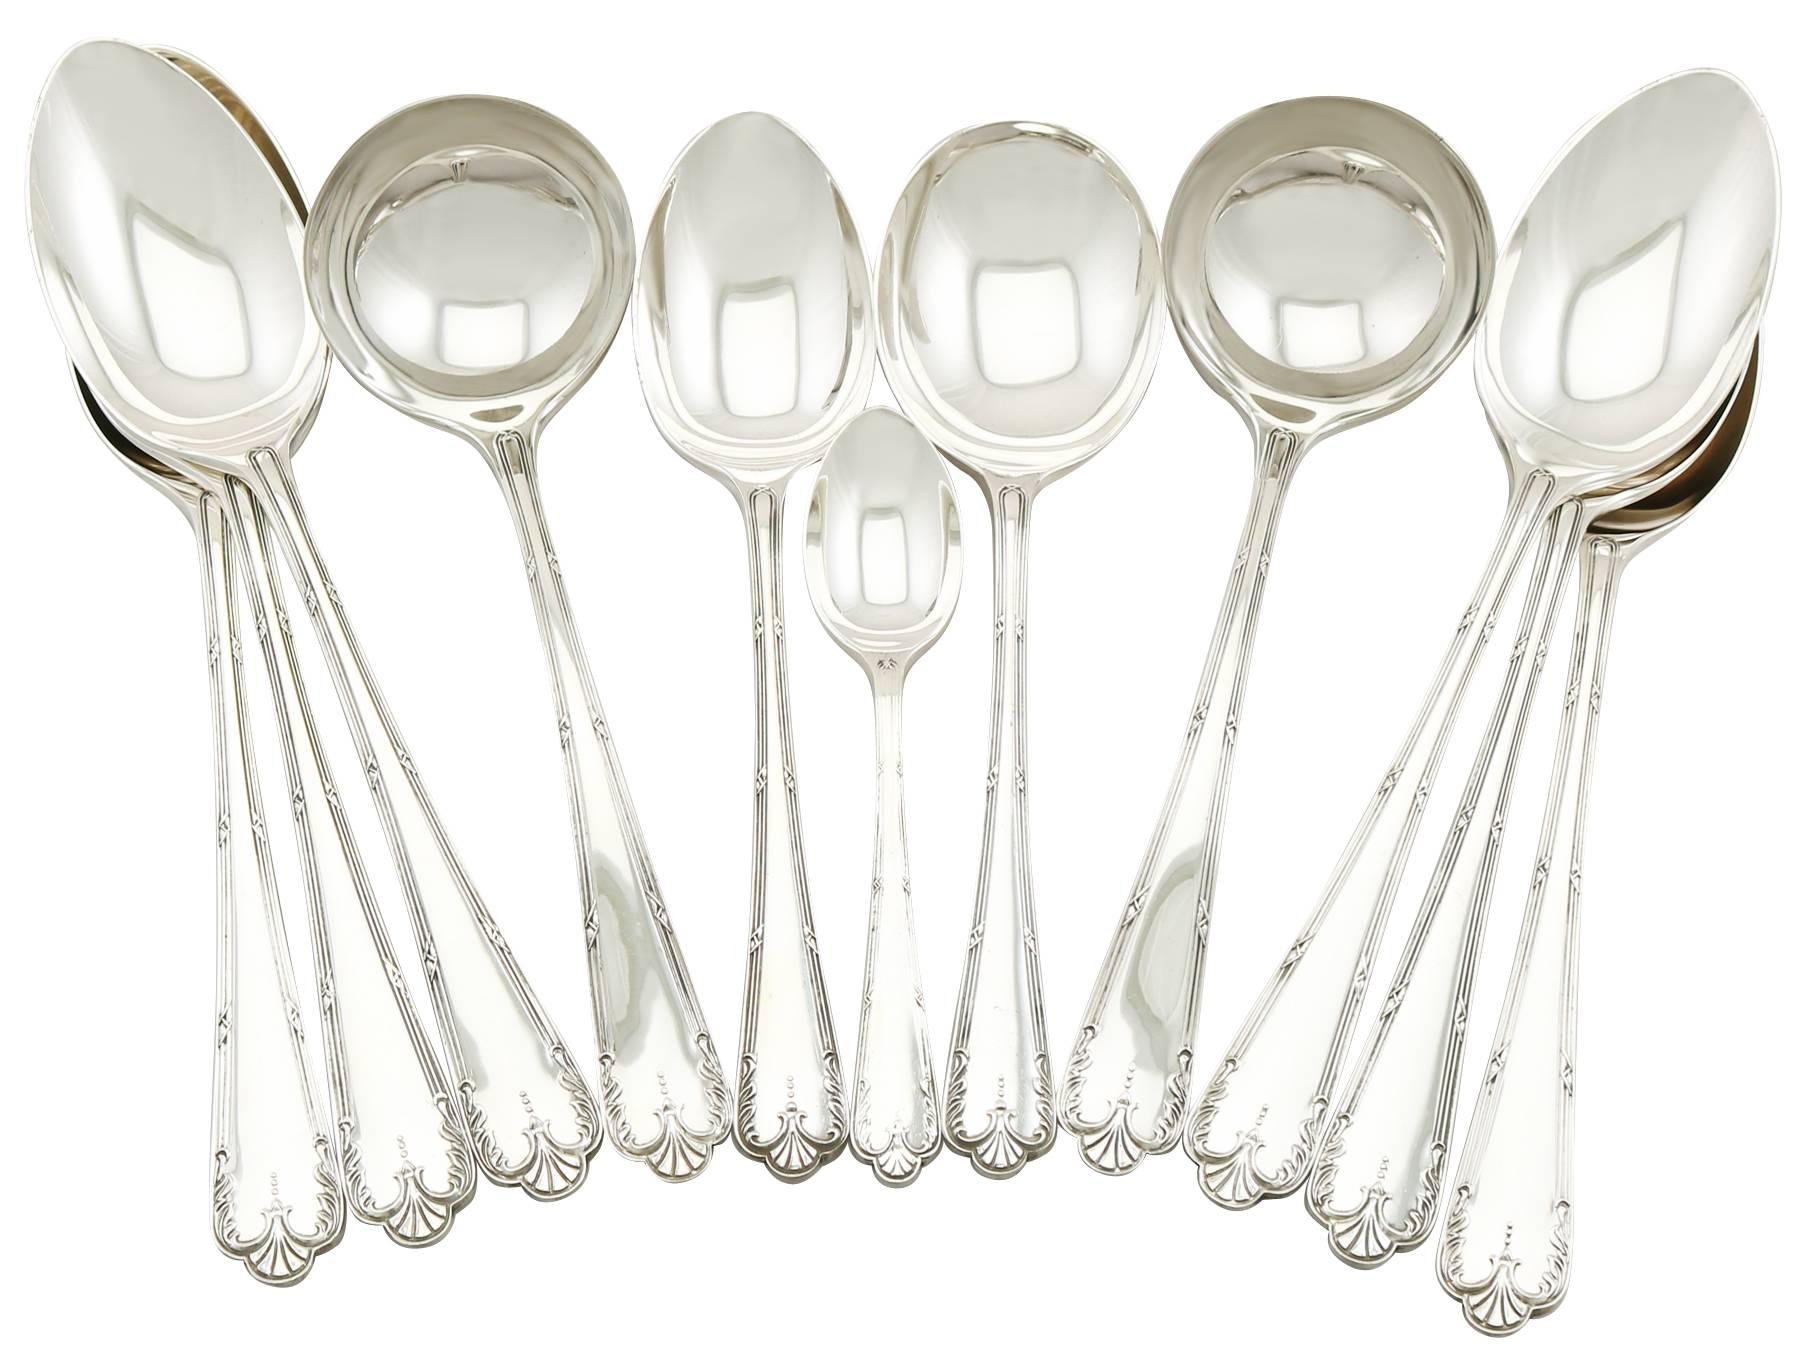 Great Britain (UK) 1973 Sterling Silver Canteen of Cutlery for 12 Persons